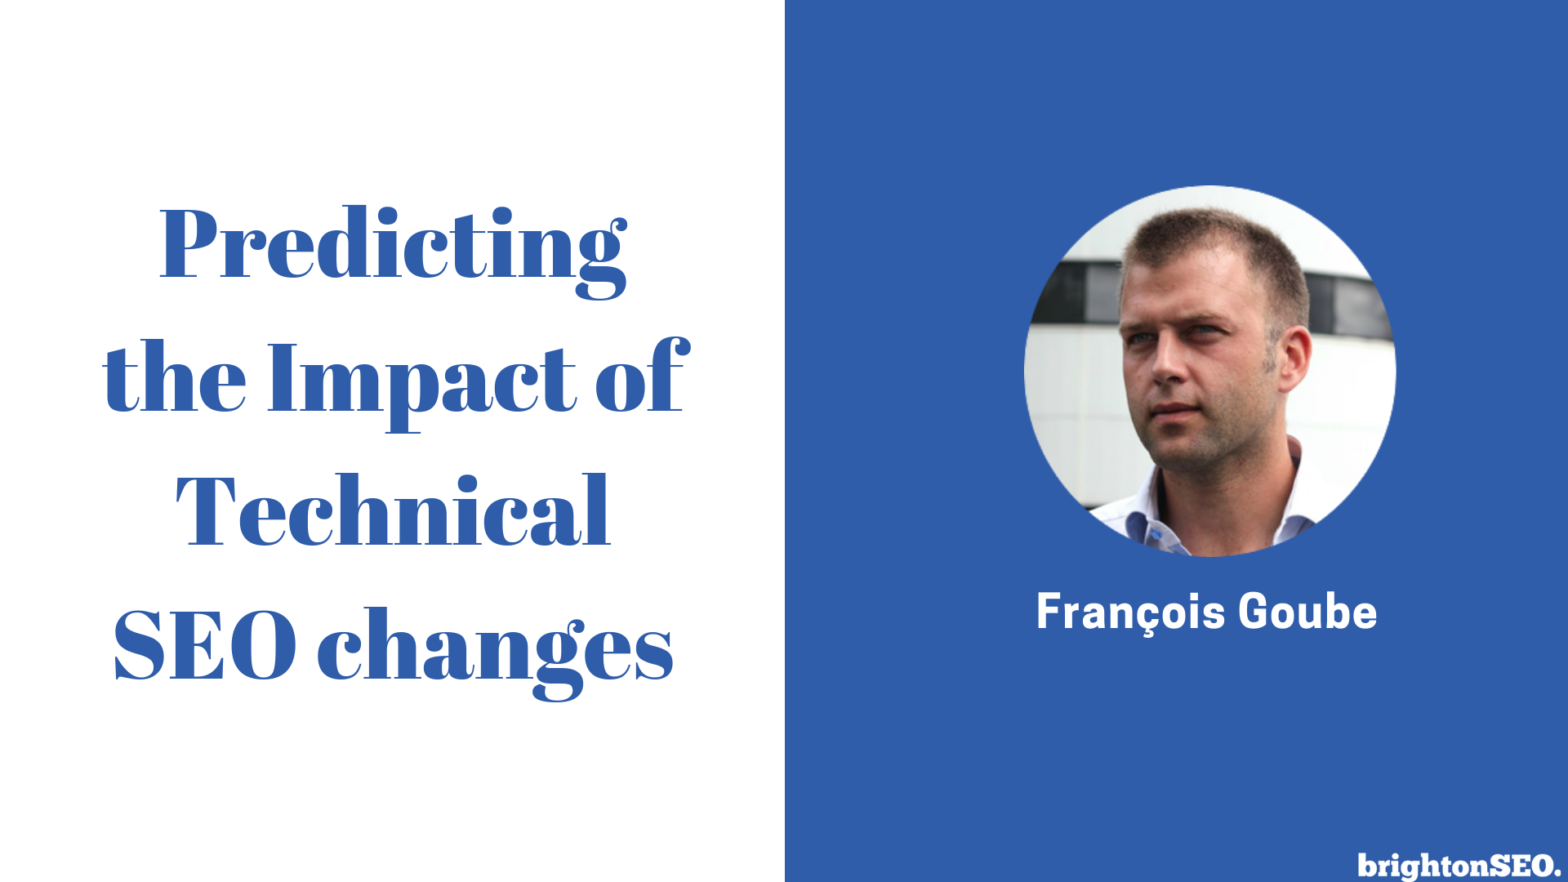 Predicting the Impact of Technical SEO changes | BrightonSEO 2019